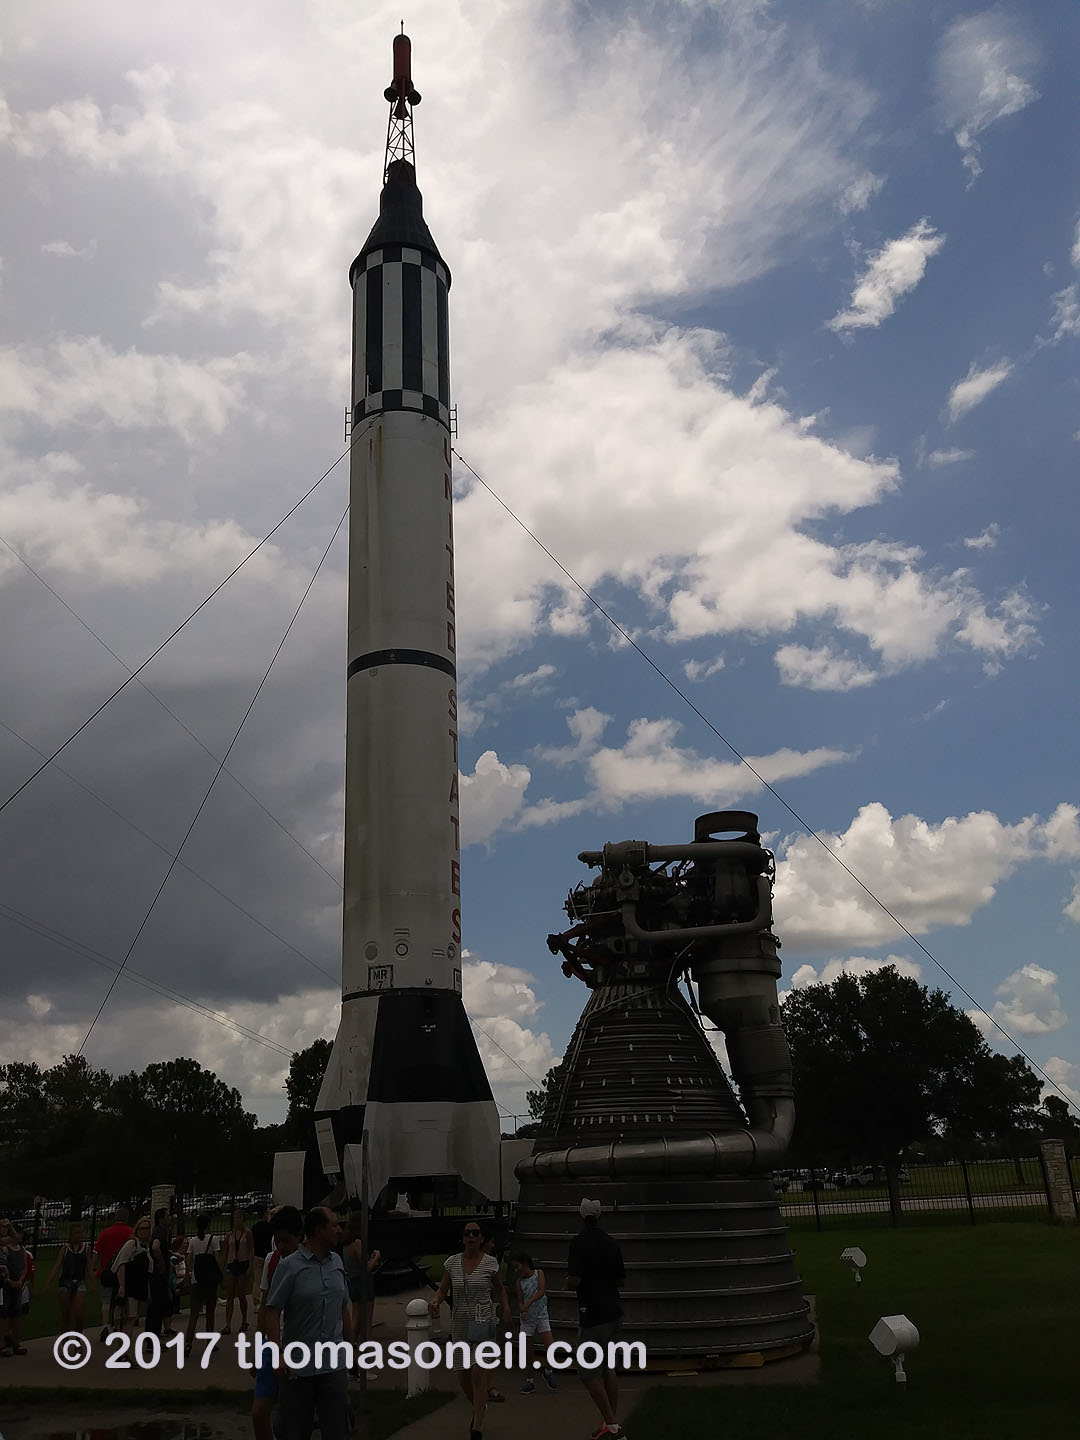 Redstone rocket used for Mercury missions next to a Saturn V engine, Johnson Space Center, Houston, 2017.  Click for next photo.